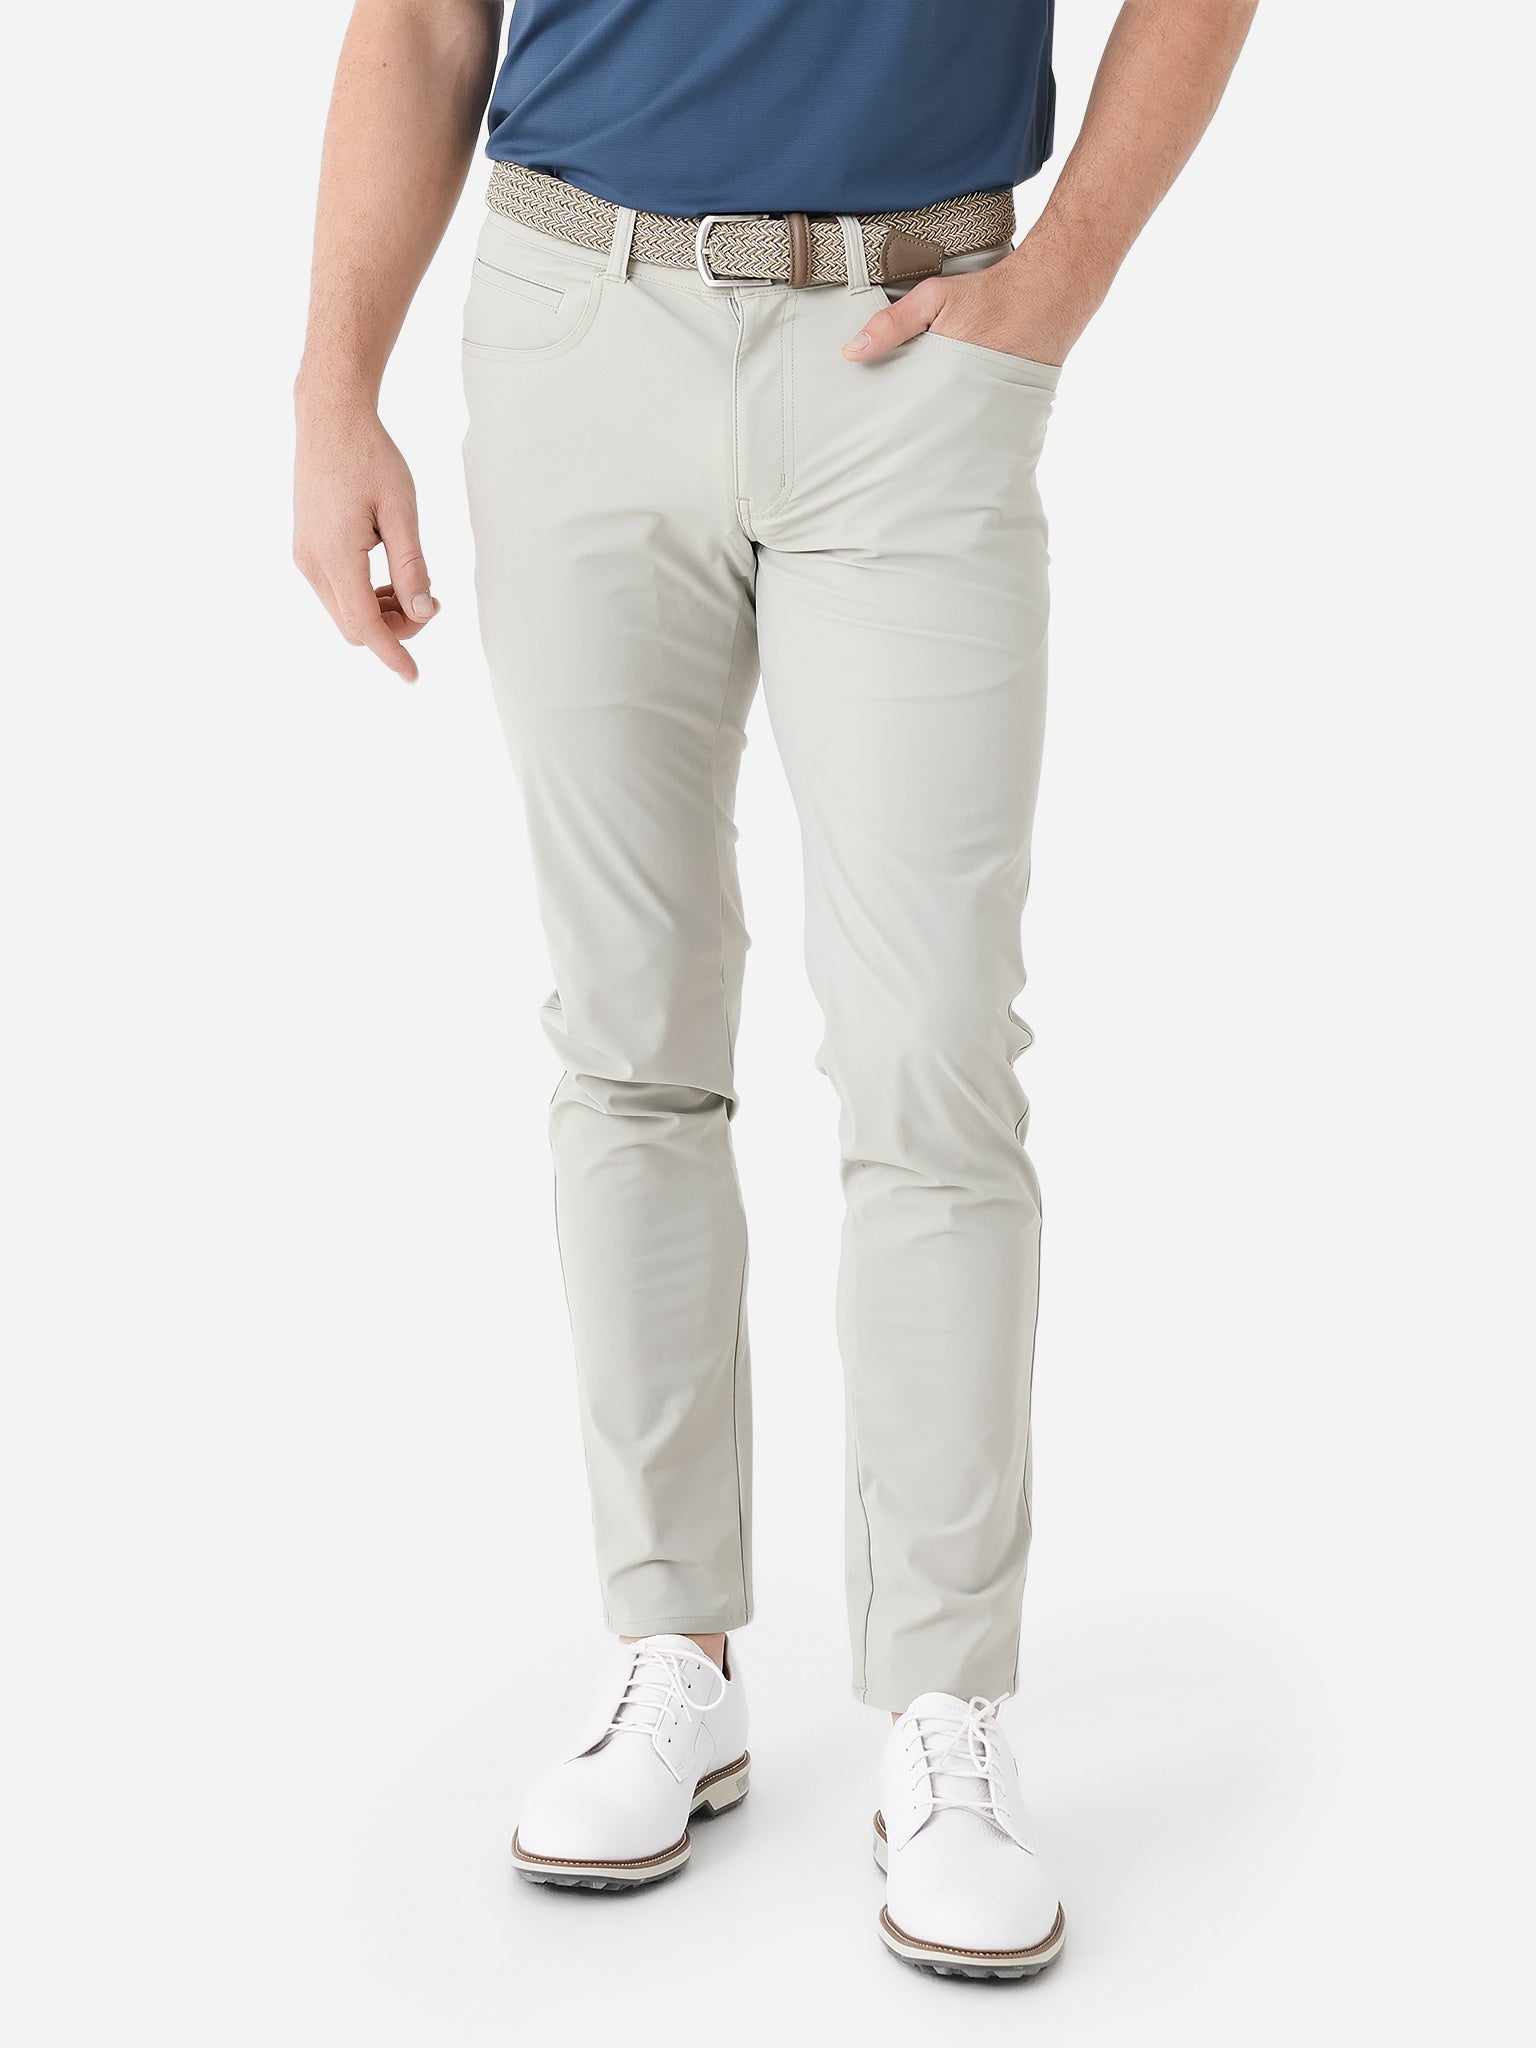 Performance Five-Pocket Pant by Peter Millar